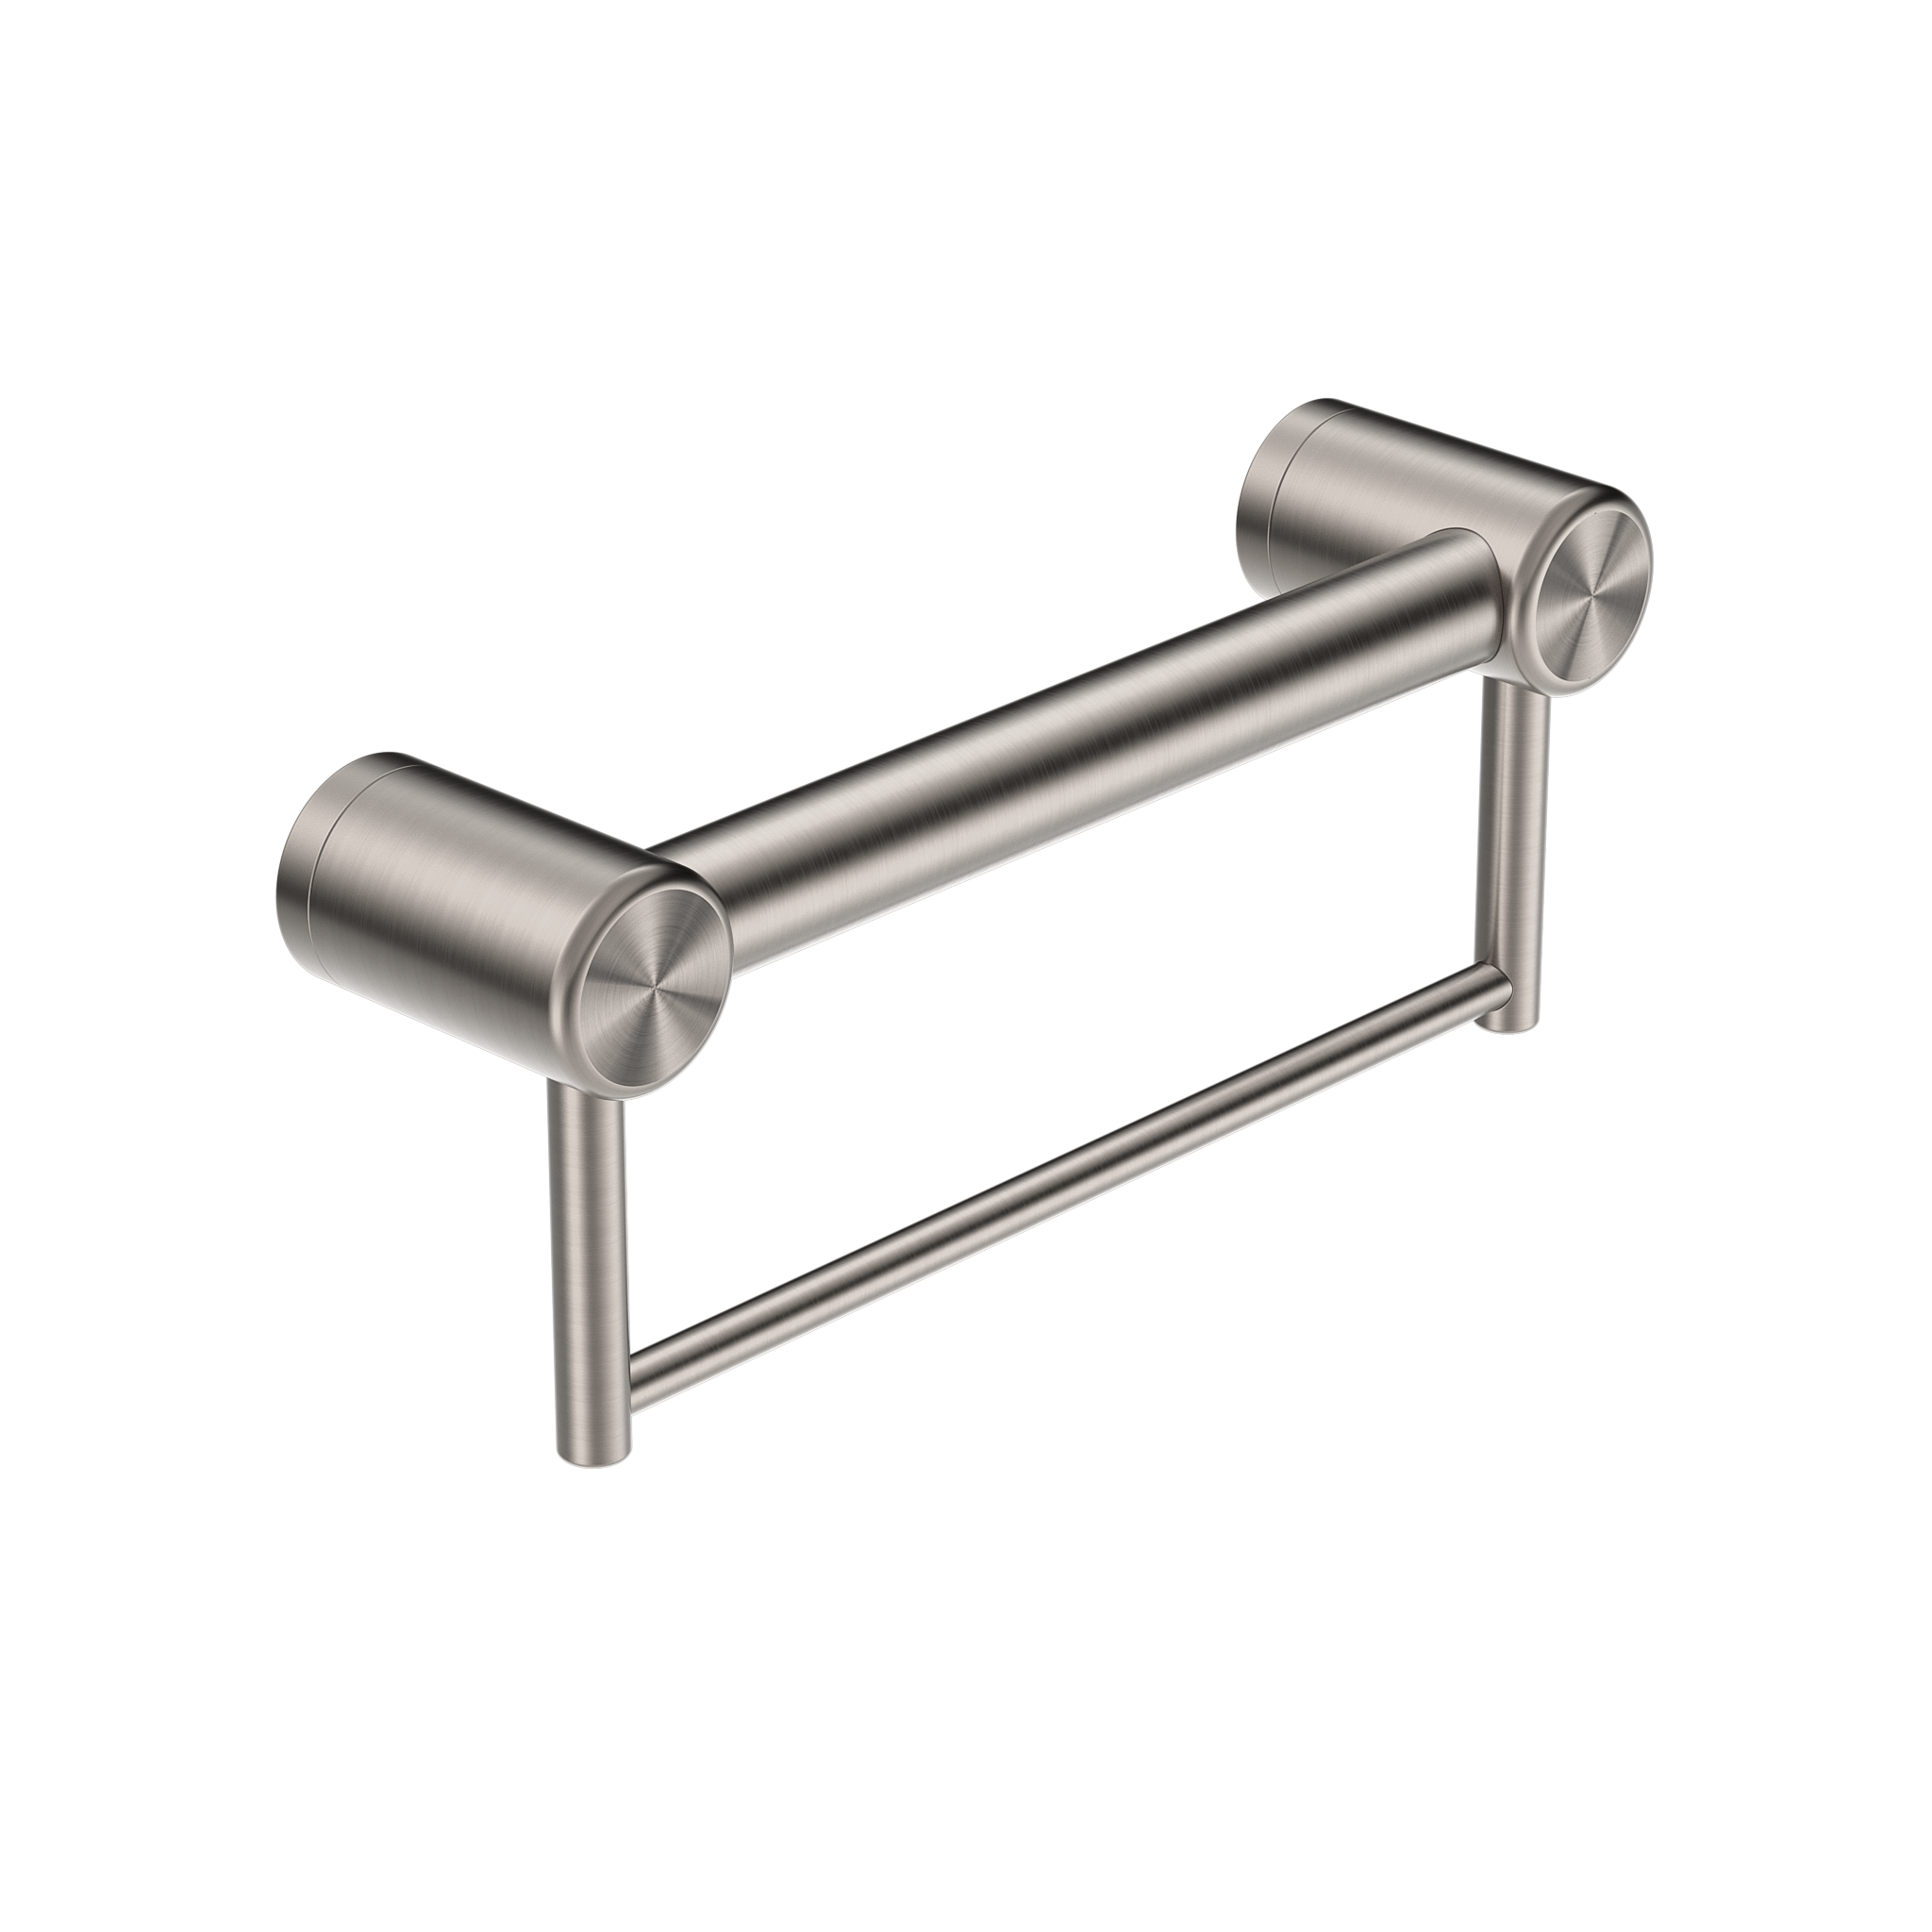 CALIBRE MECCA 32MM GRAB RAIL WITH TOWEL HOLDER 300MM BRUSHED NICKEL